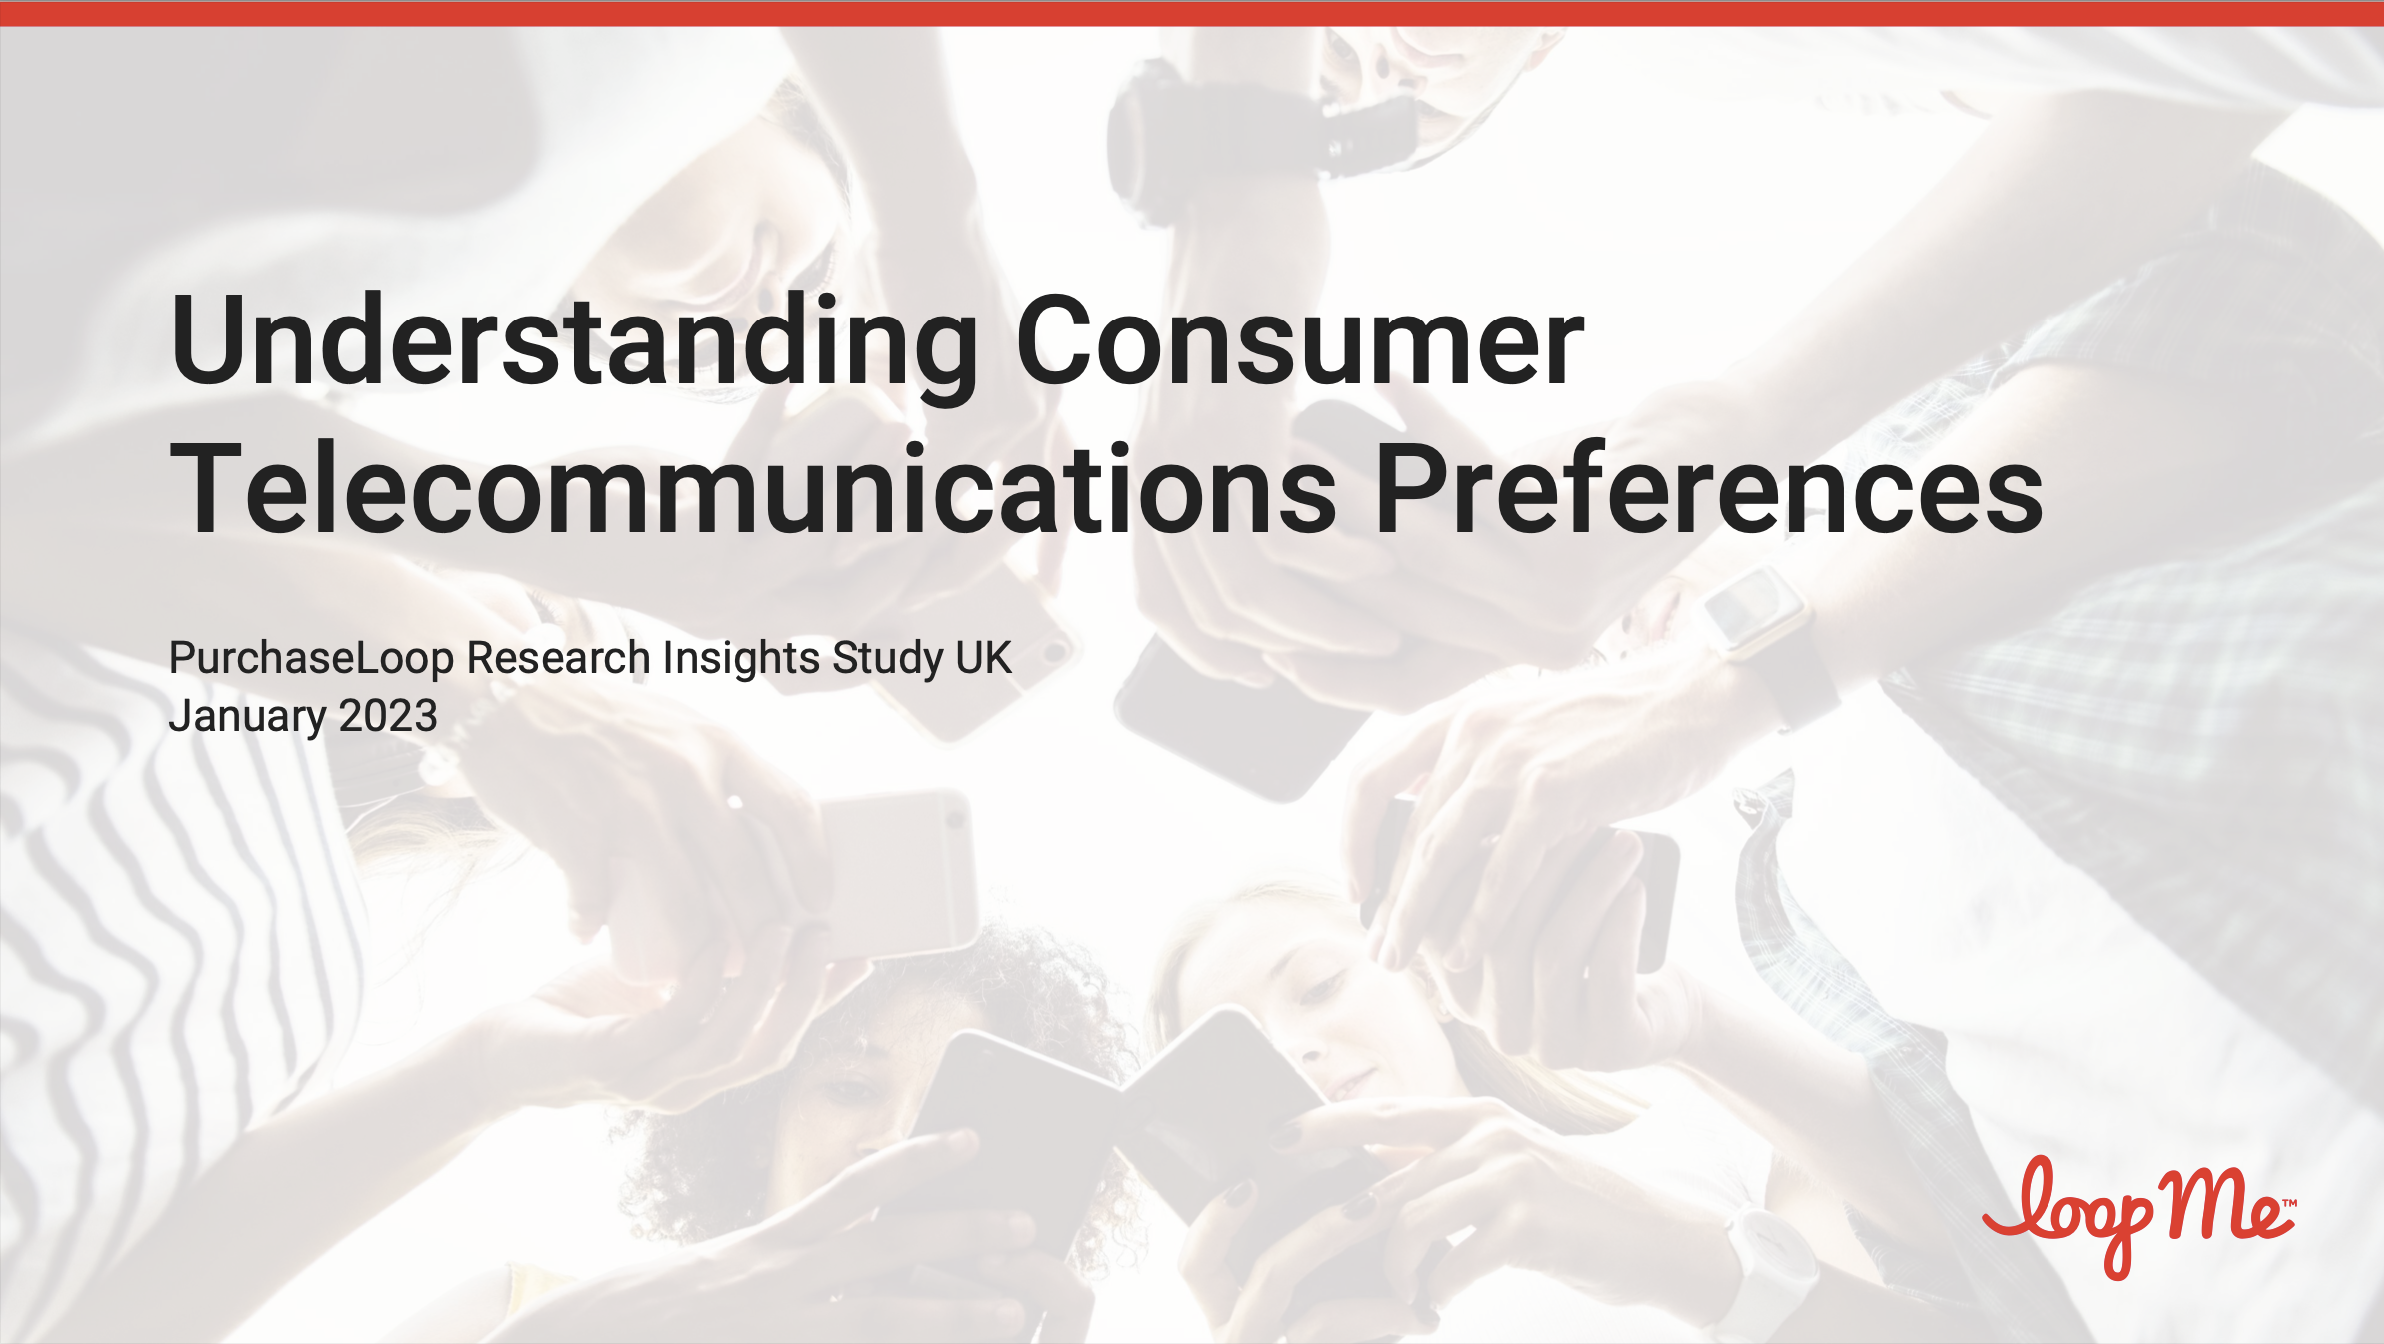 Understanding Consumer Telecommunications Preferences: PurchaseLoop Research Insights Study UK